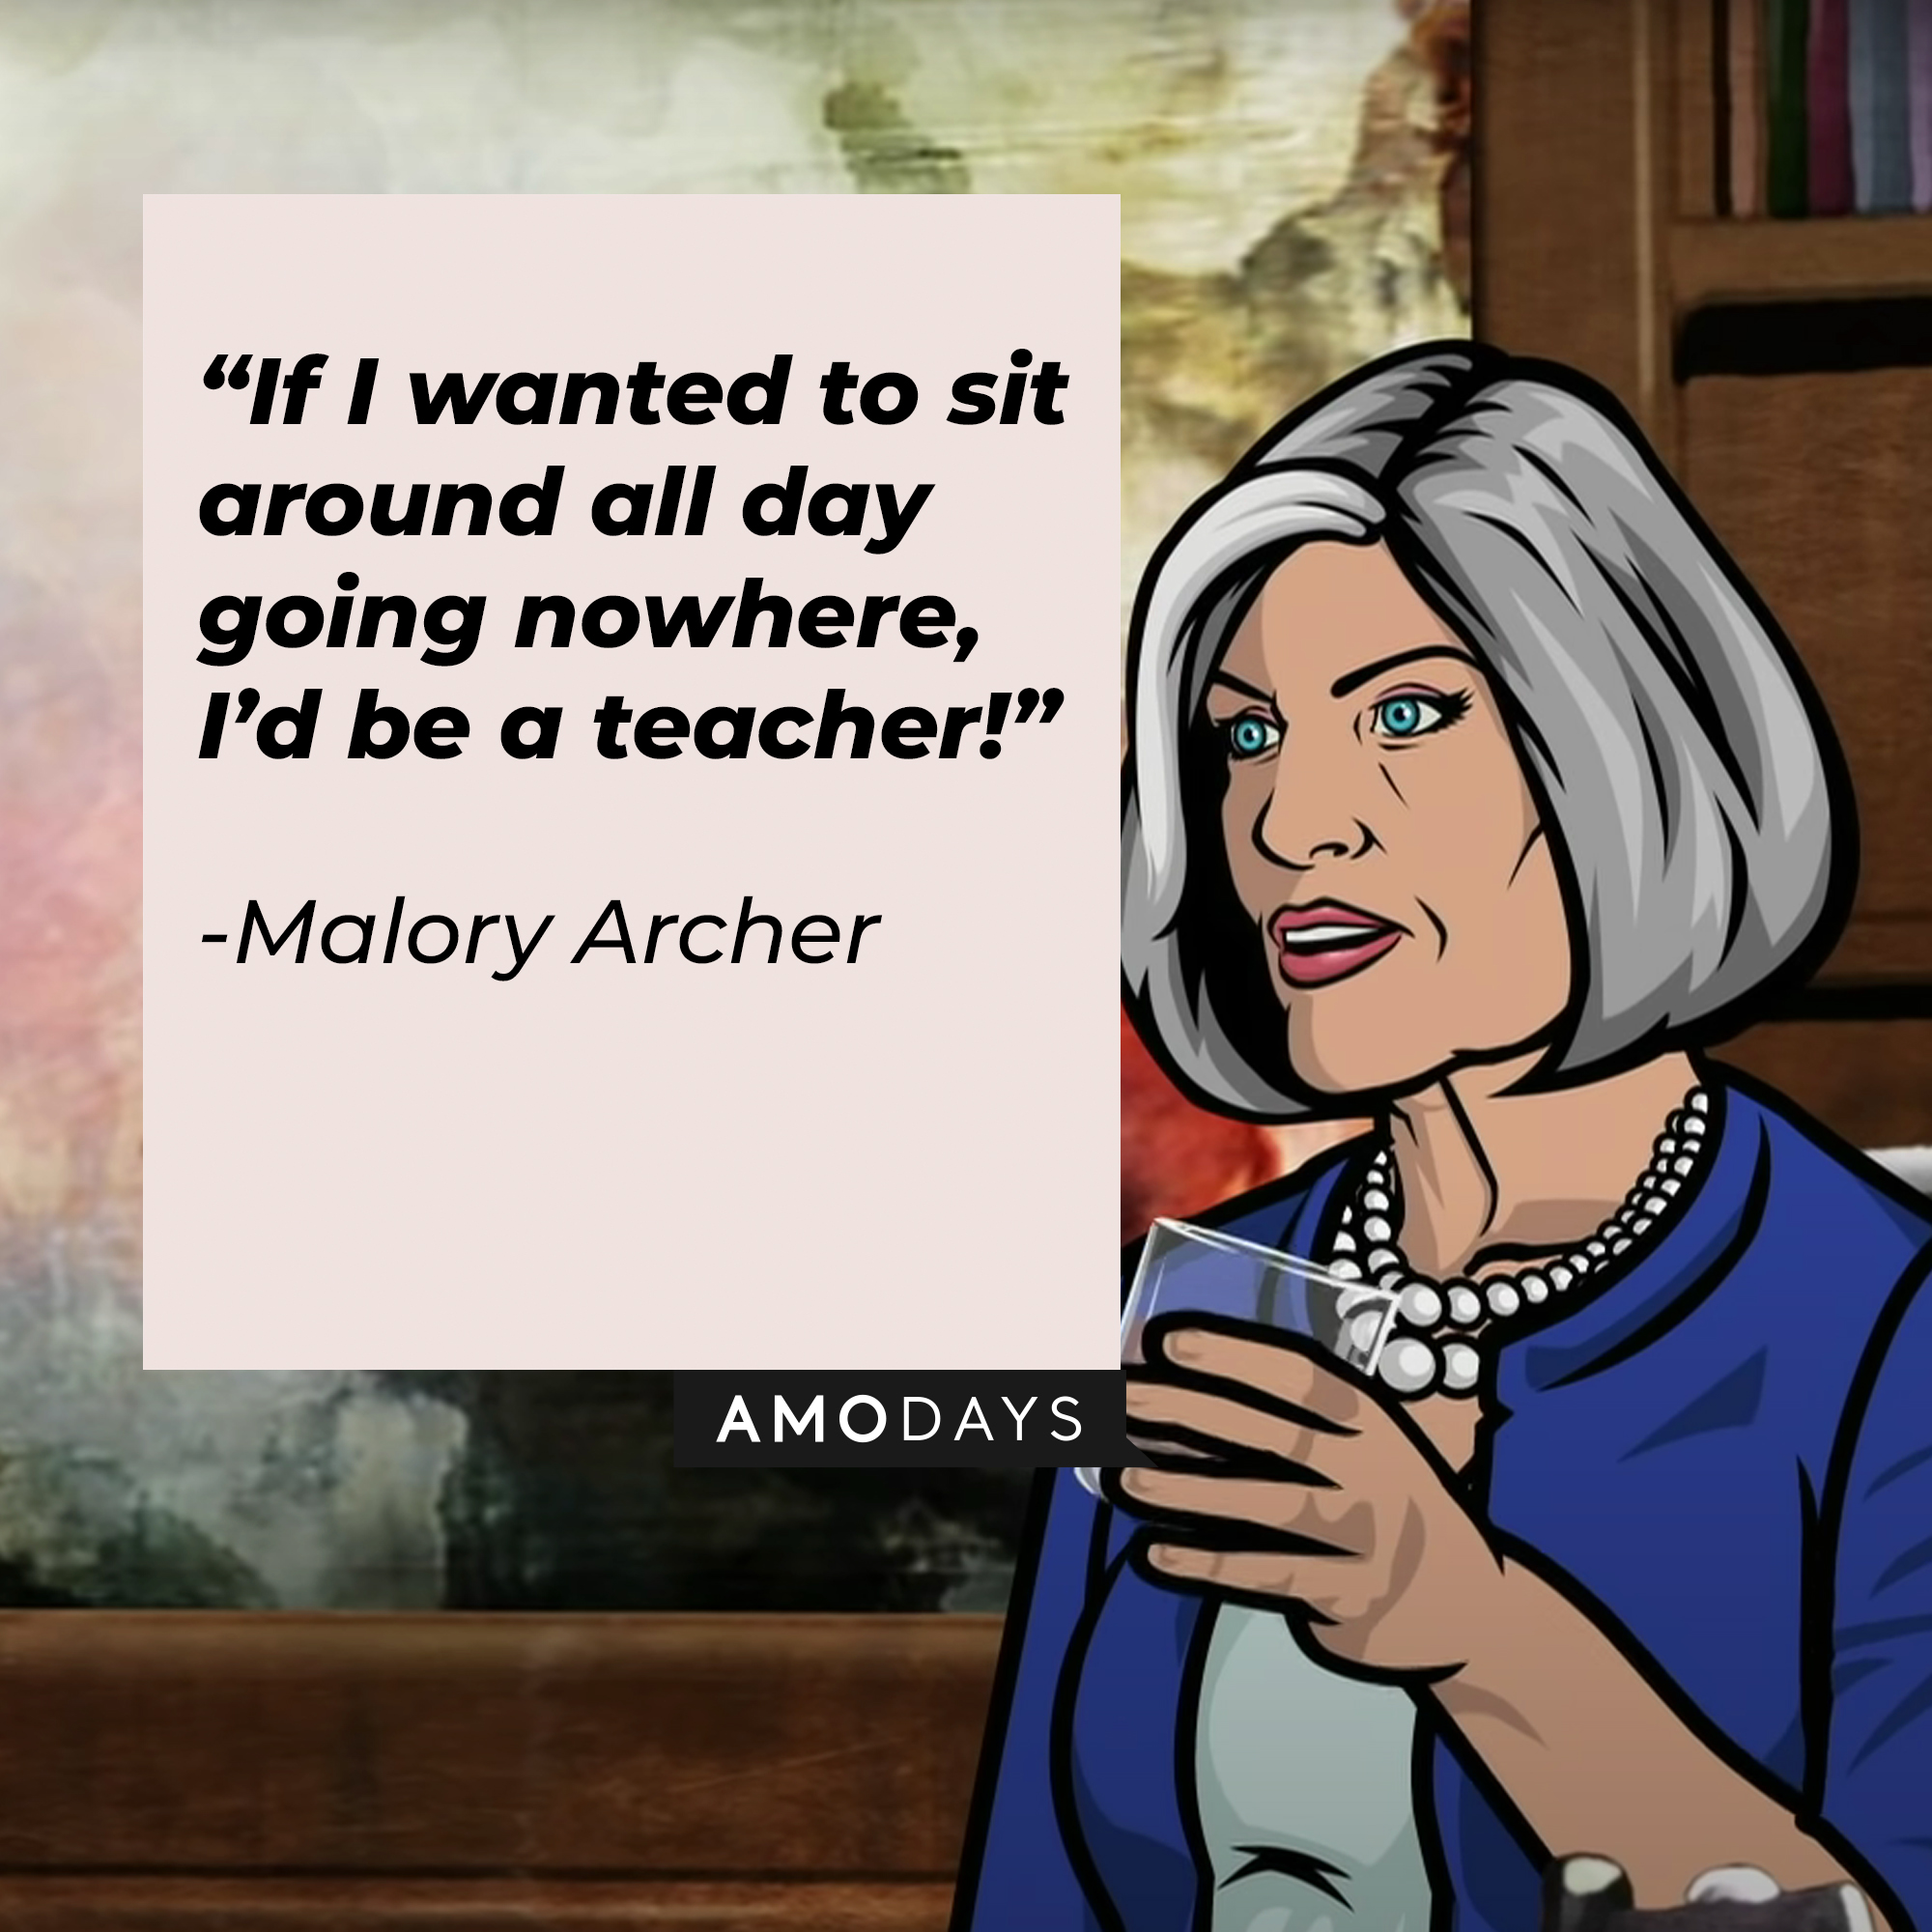 An Image of Malory Archer with her quote: “If I wanted to sit around all day going nowhere, I’d be a teacher!” | Source: Youtube.com/Netflixnordic